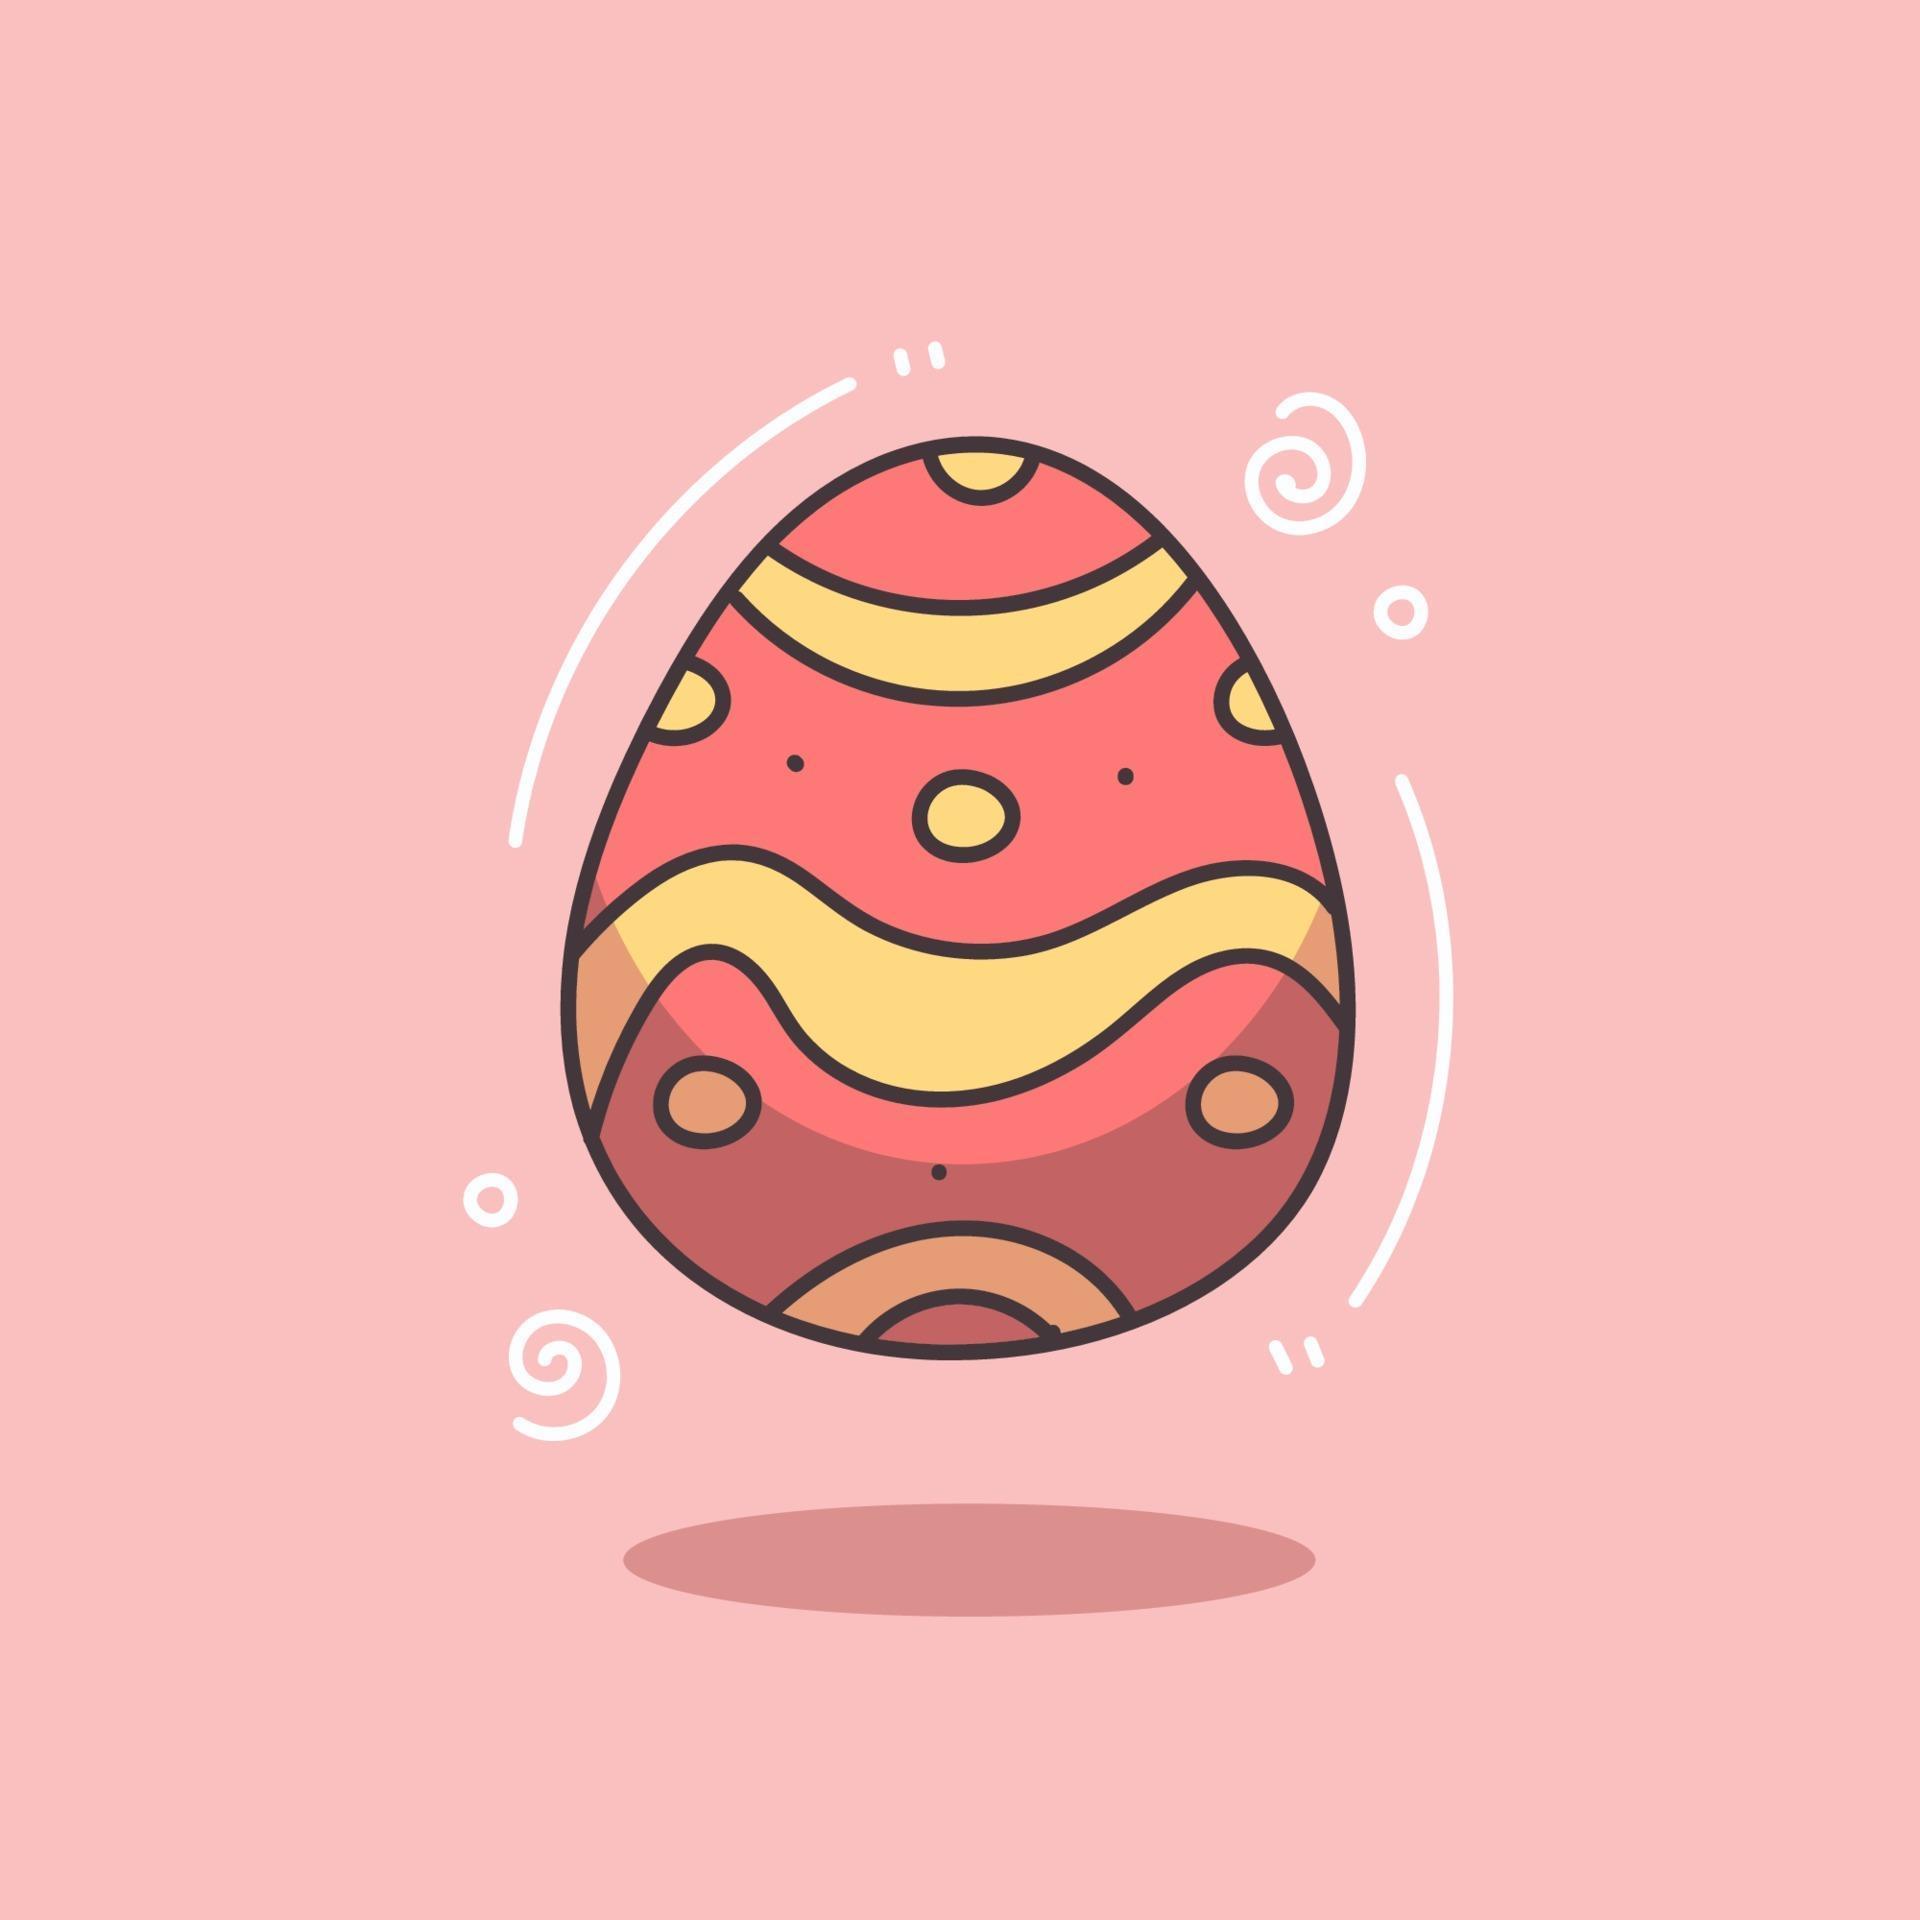 Colorful ornate easter eggs illustrations vector